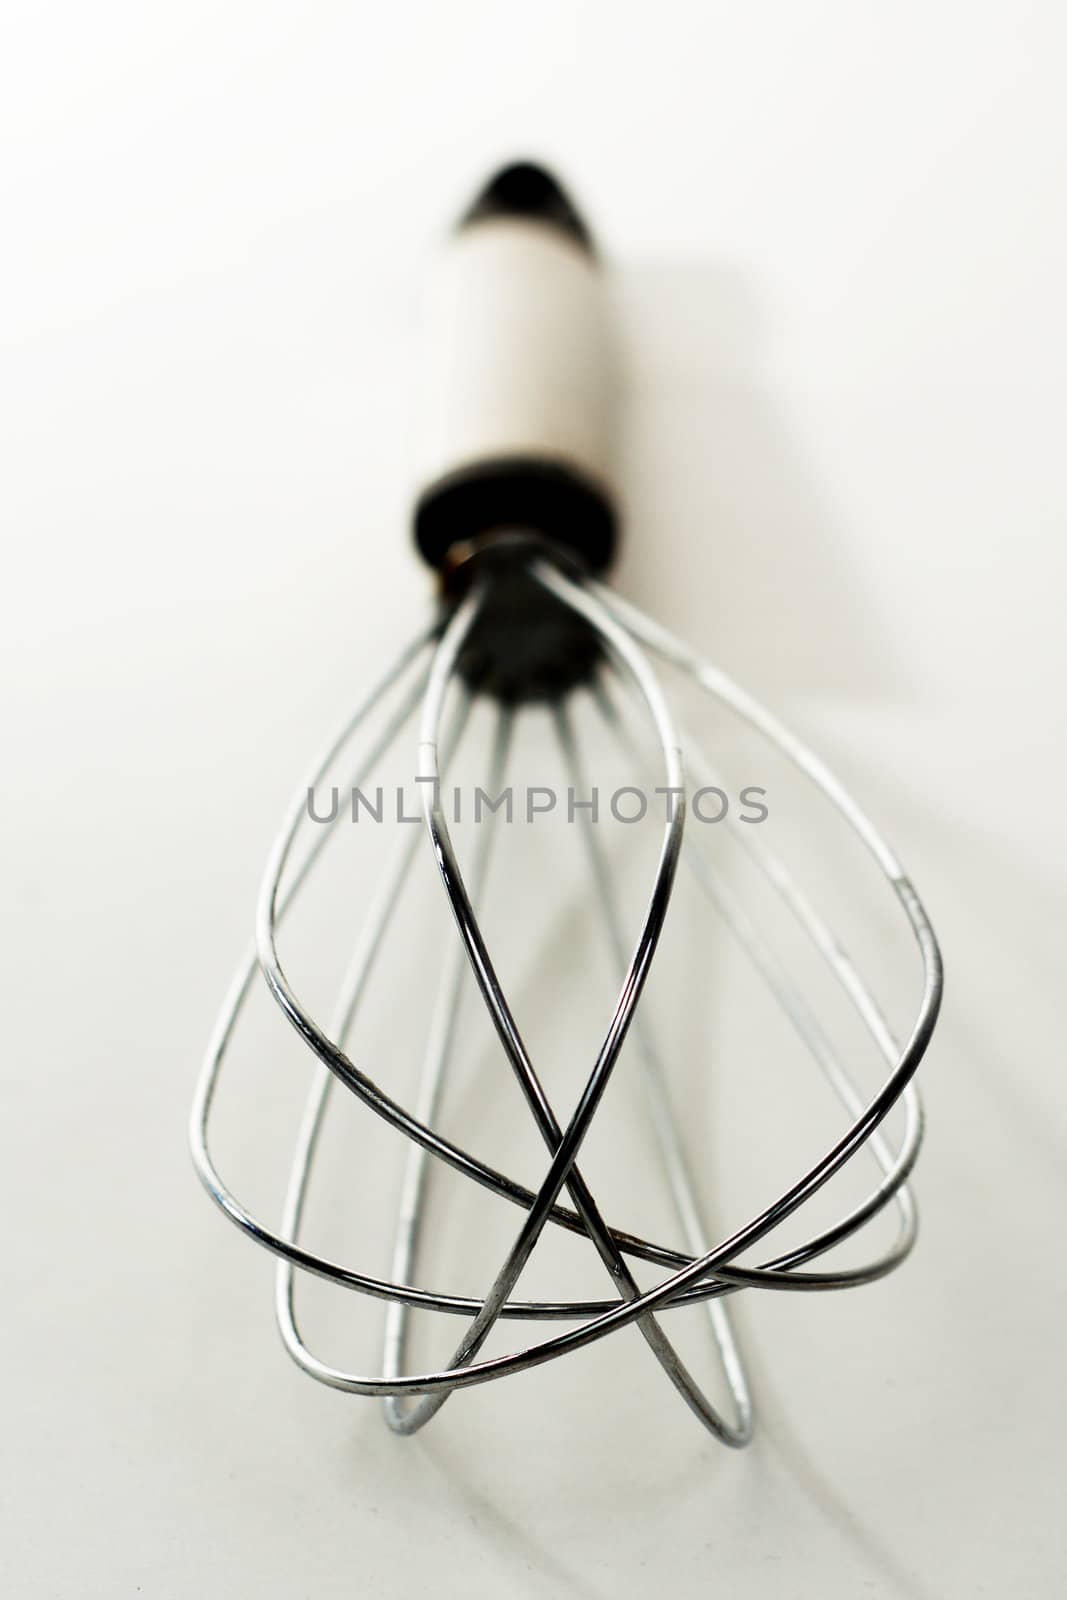 Wisk detail isolated over white background